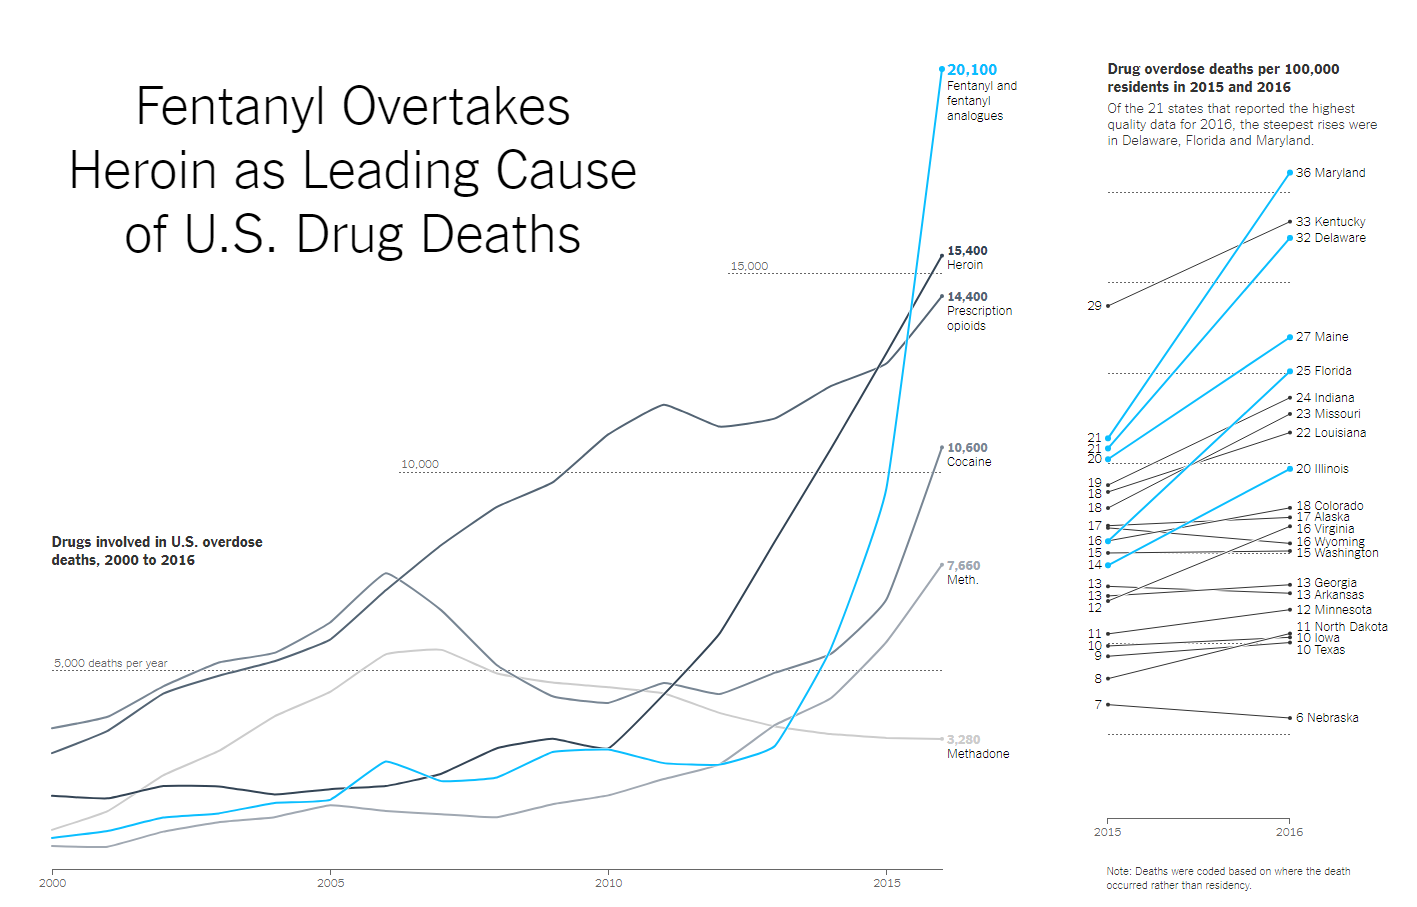 Fentanyl and Other Drug Deaths in US, 2000-2016